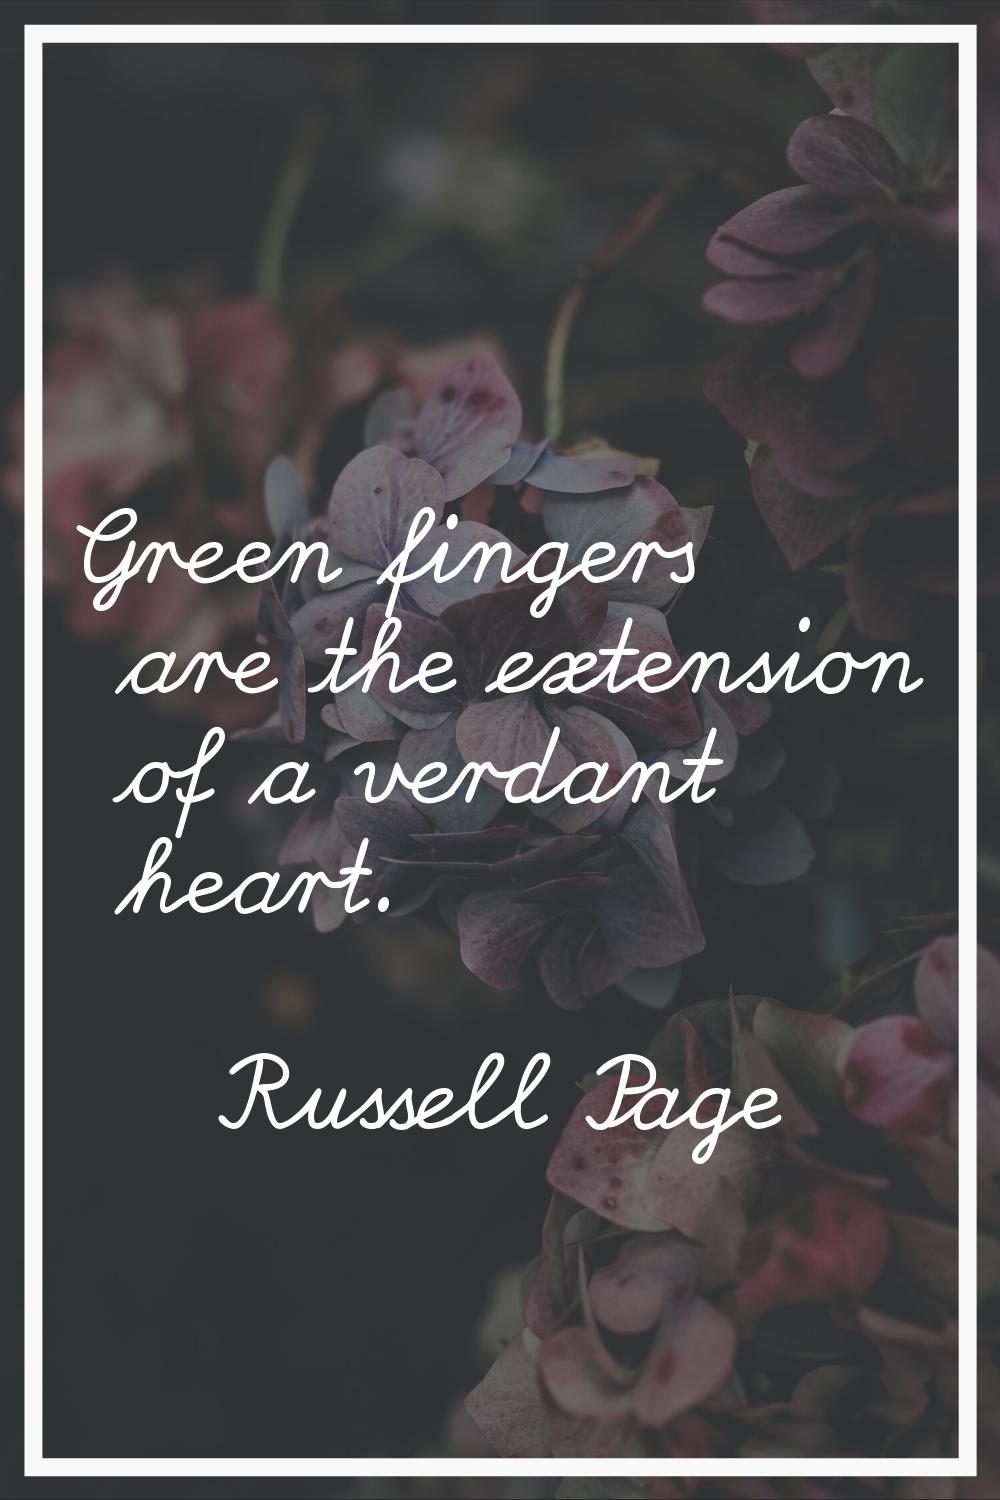 Green fingers are the extension of a verdant heart.